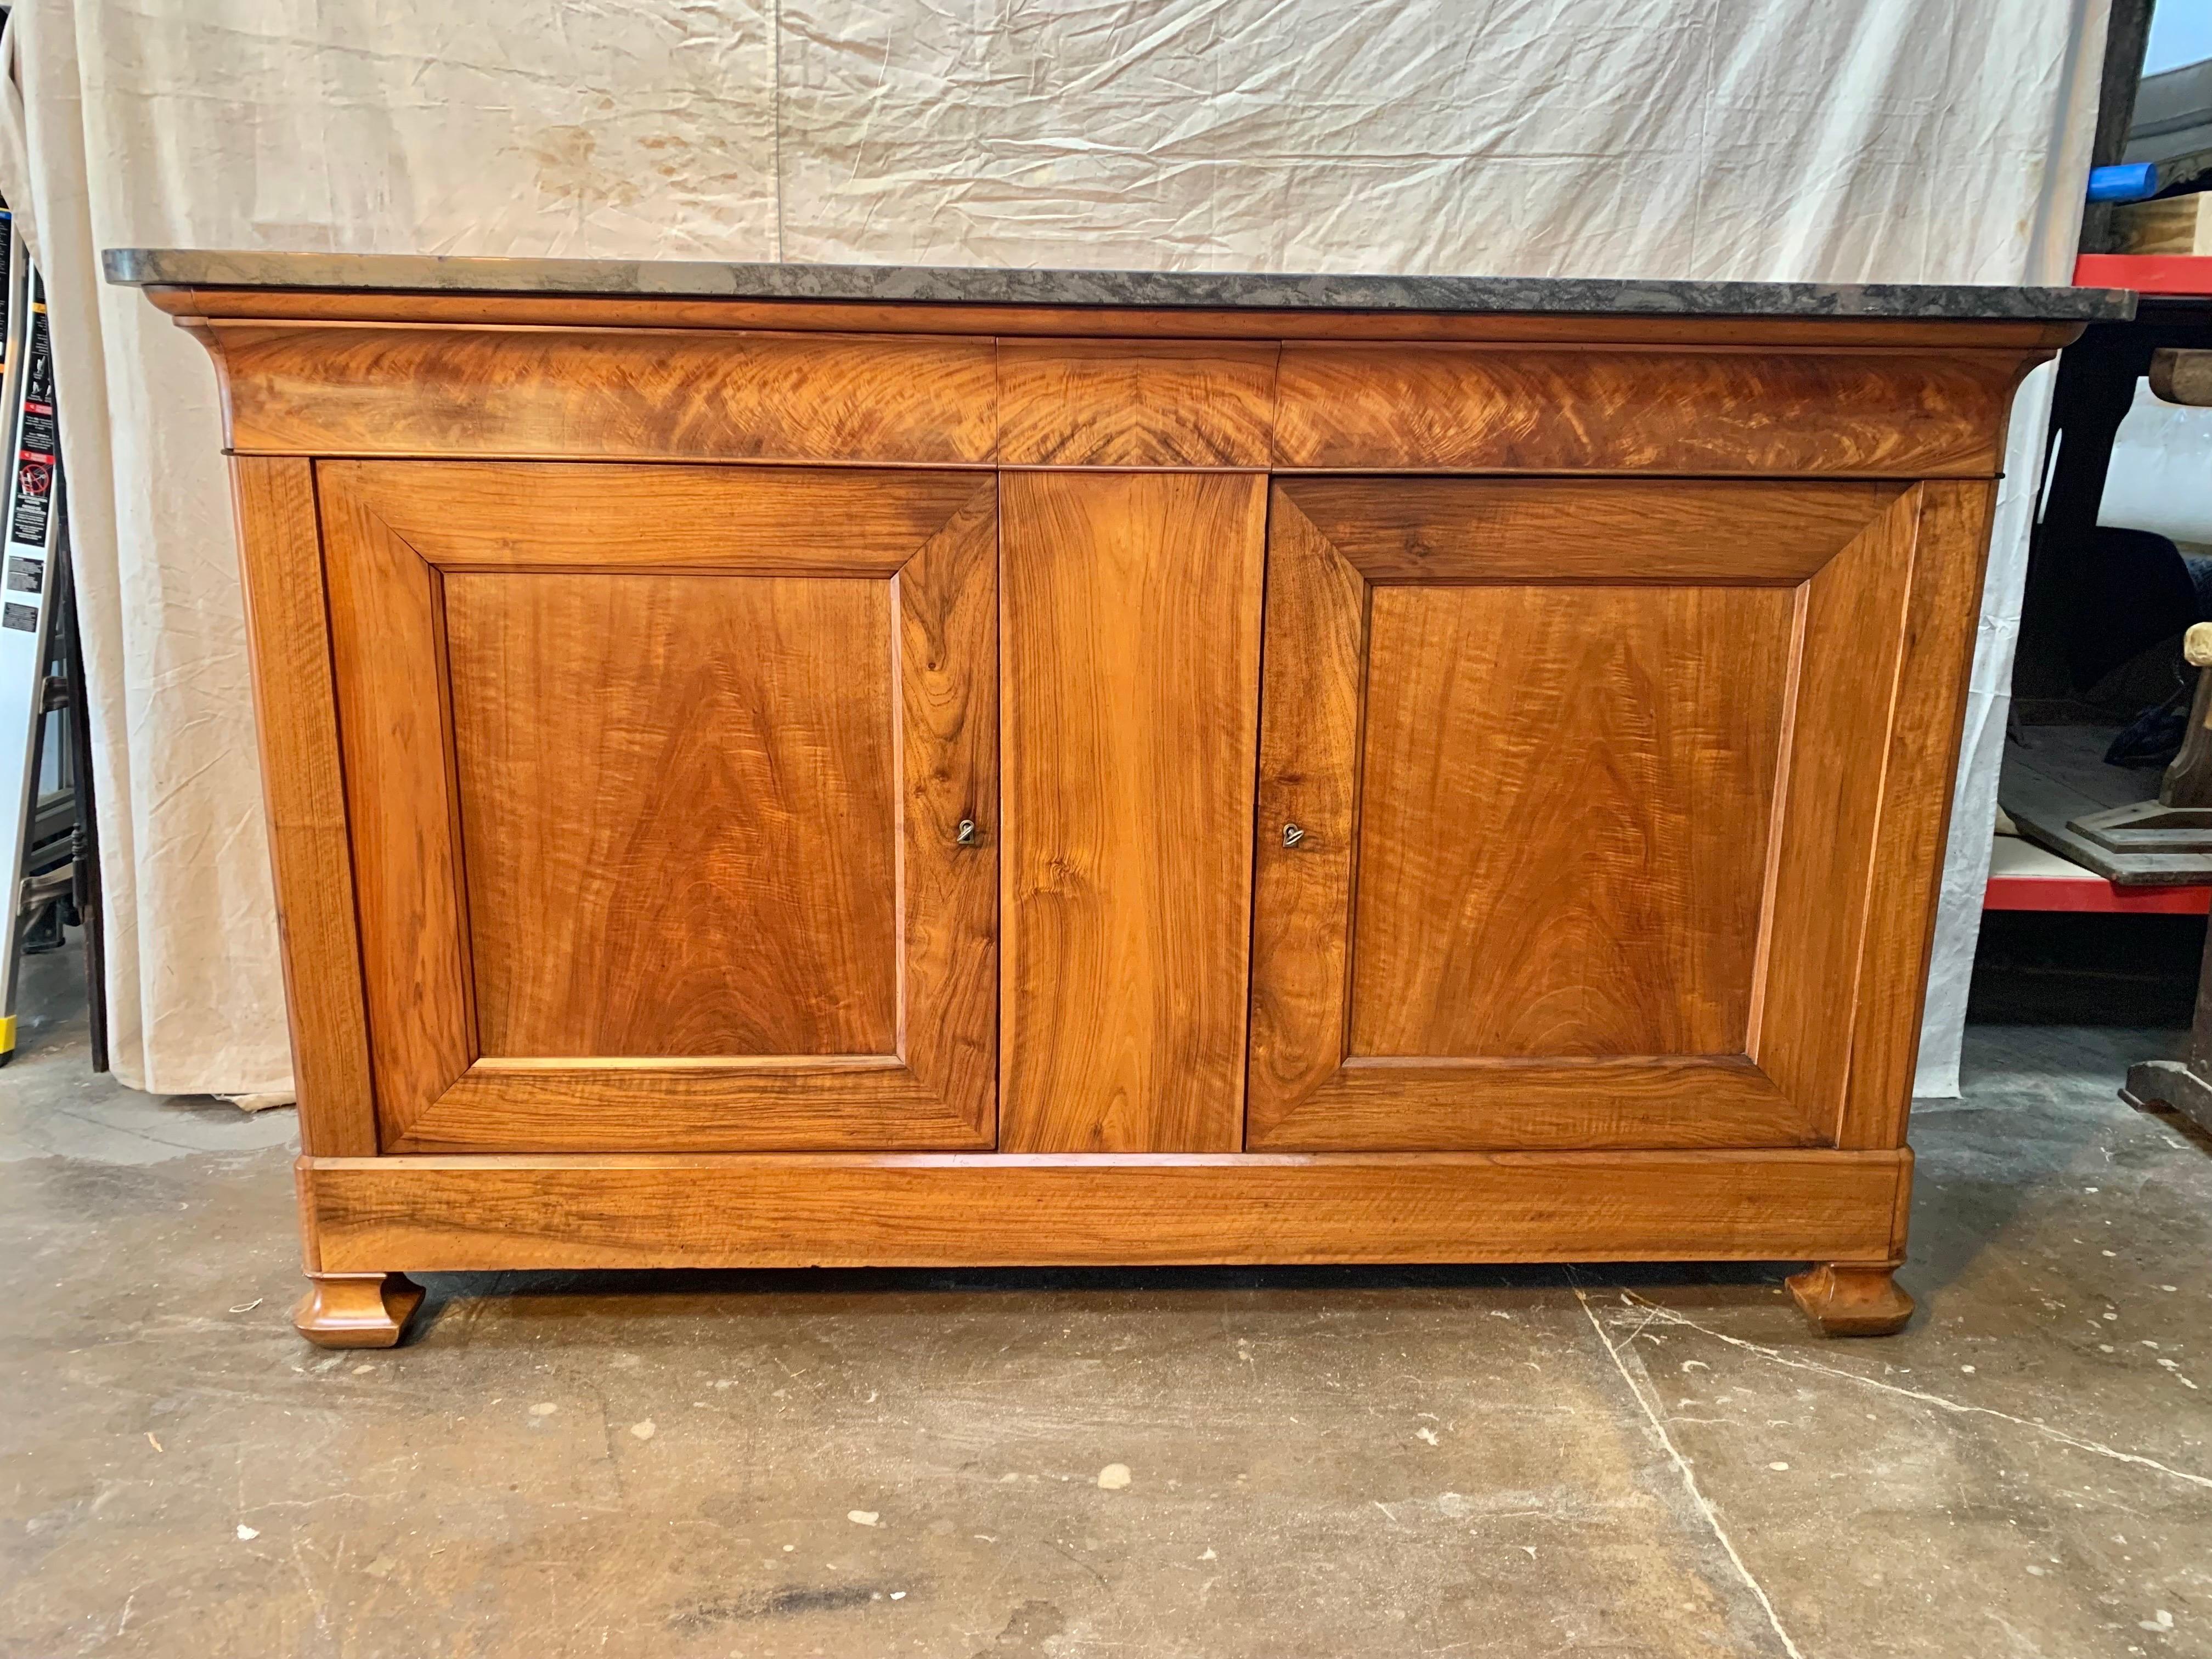 Found in the South of France, this French Louis Philippe buffet or sideboard, was crafted from old growth walnut and retains its original marble top. The marble top features a variety of grays with a beautiful white veining creating a unique color